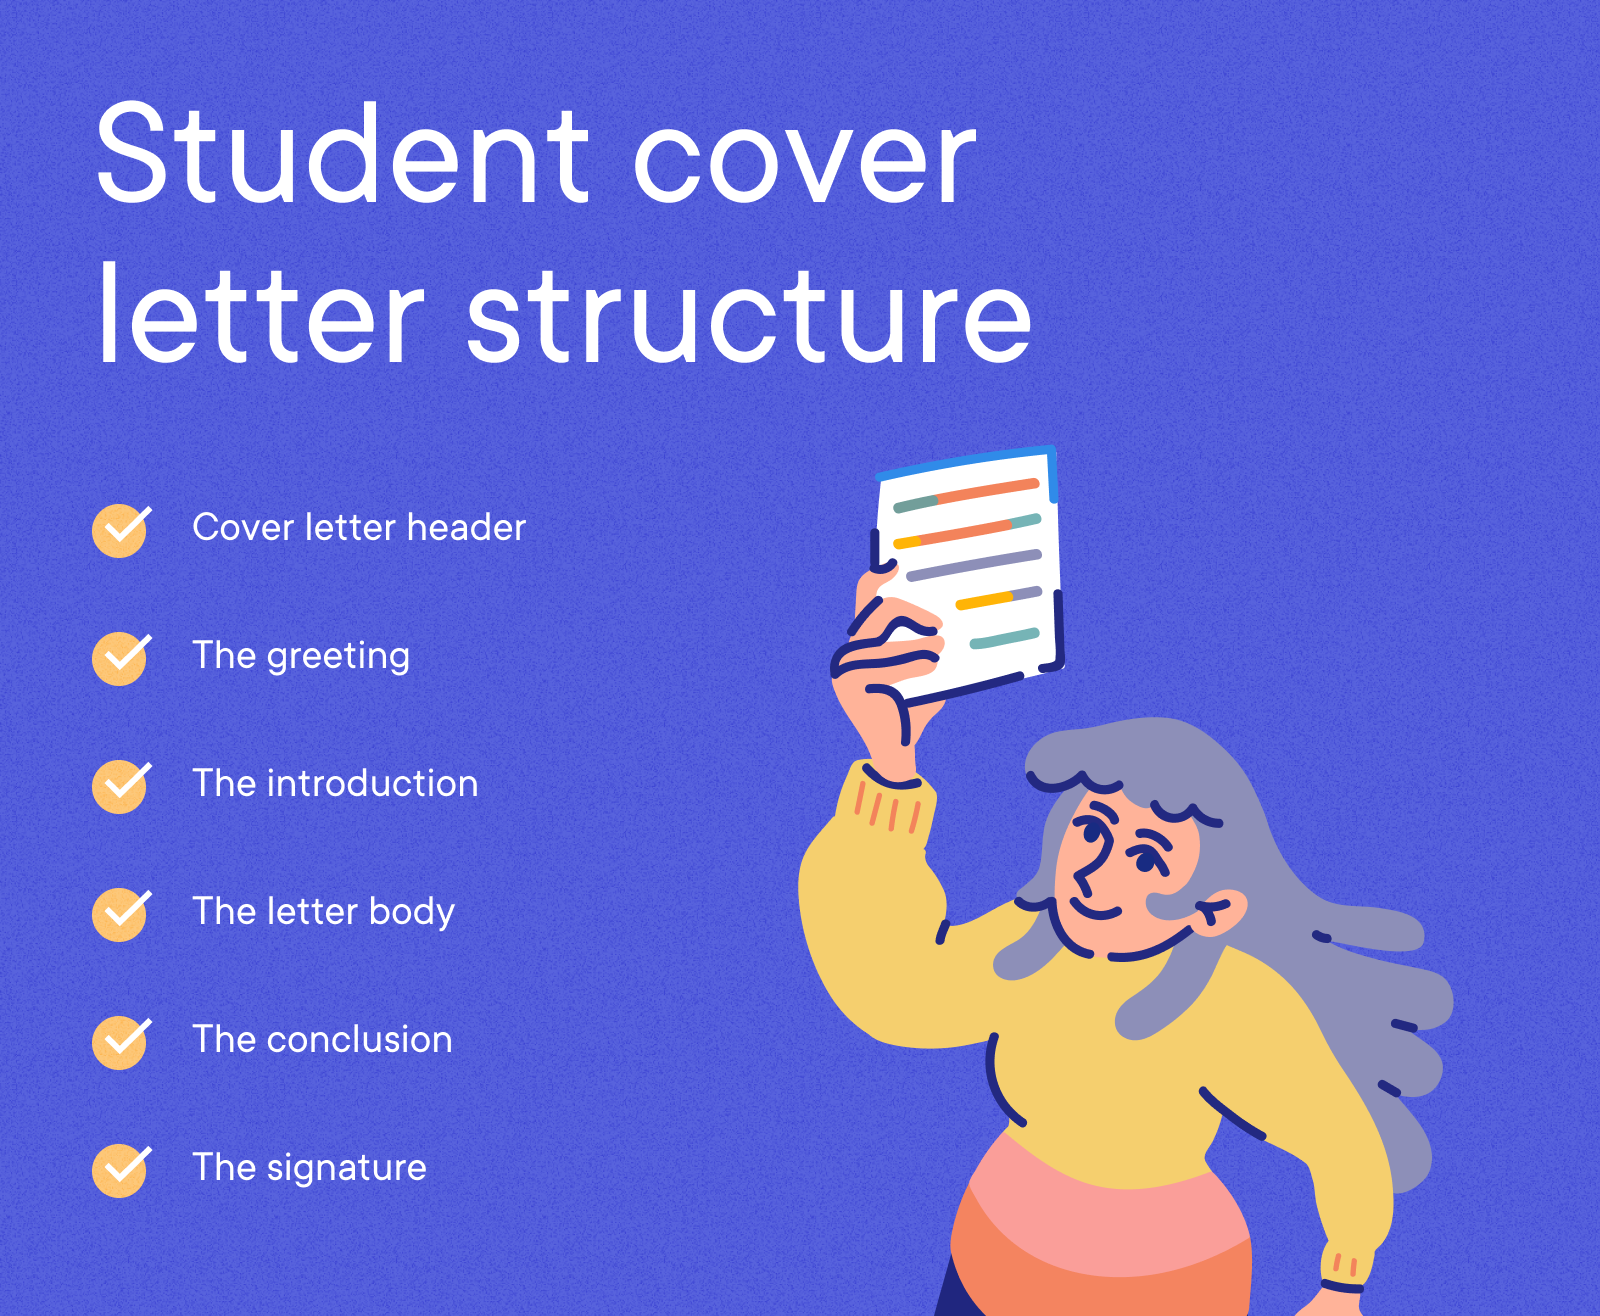 Student - Student cover letter structure